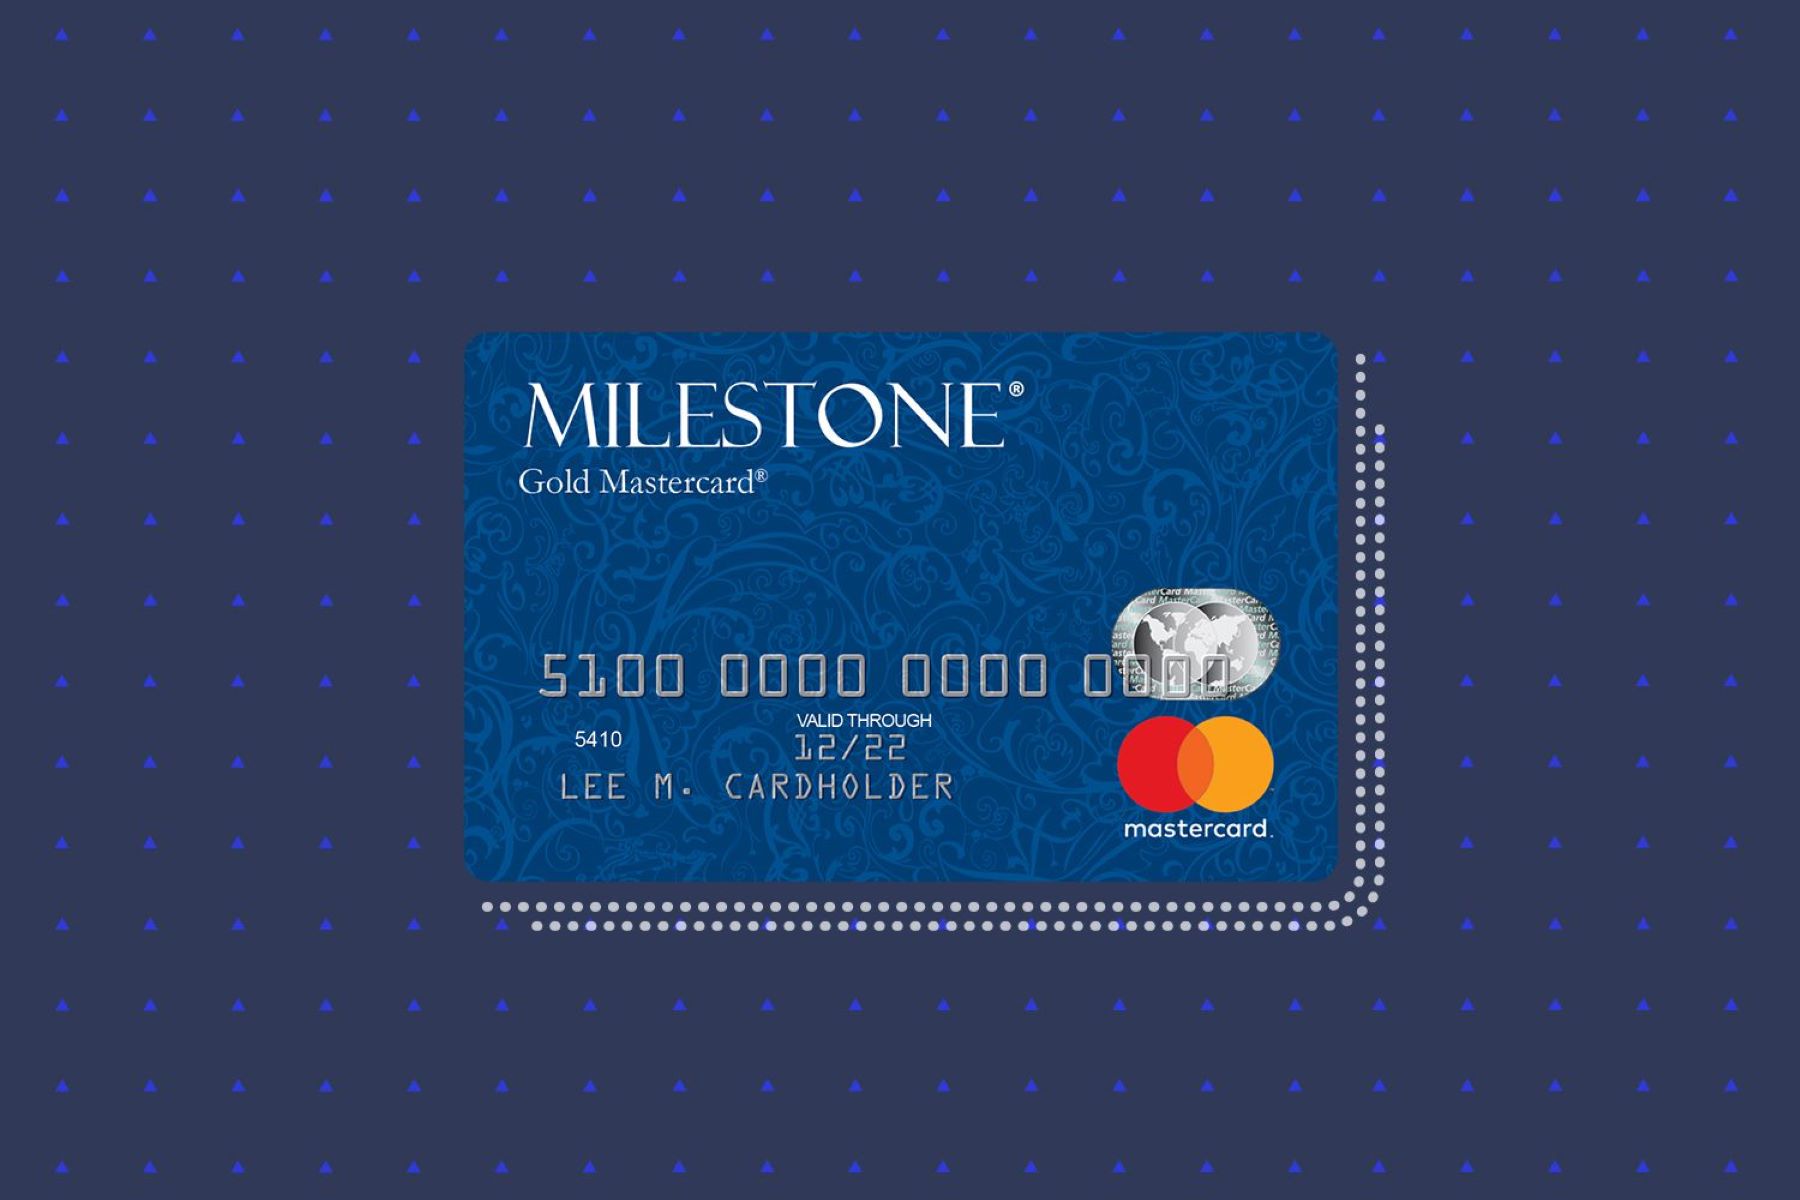 What Is The Limit On A Milestone Credit Card?